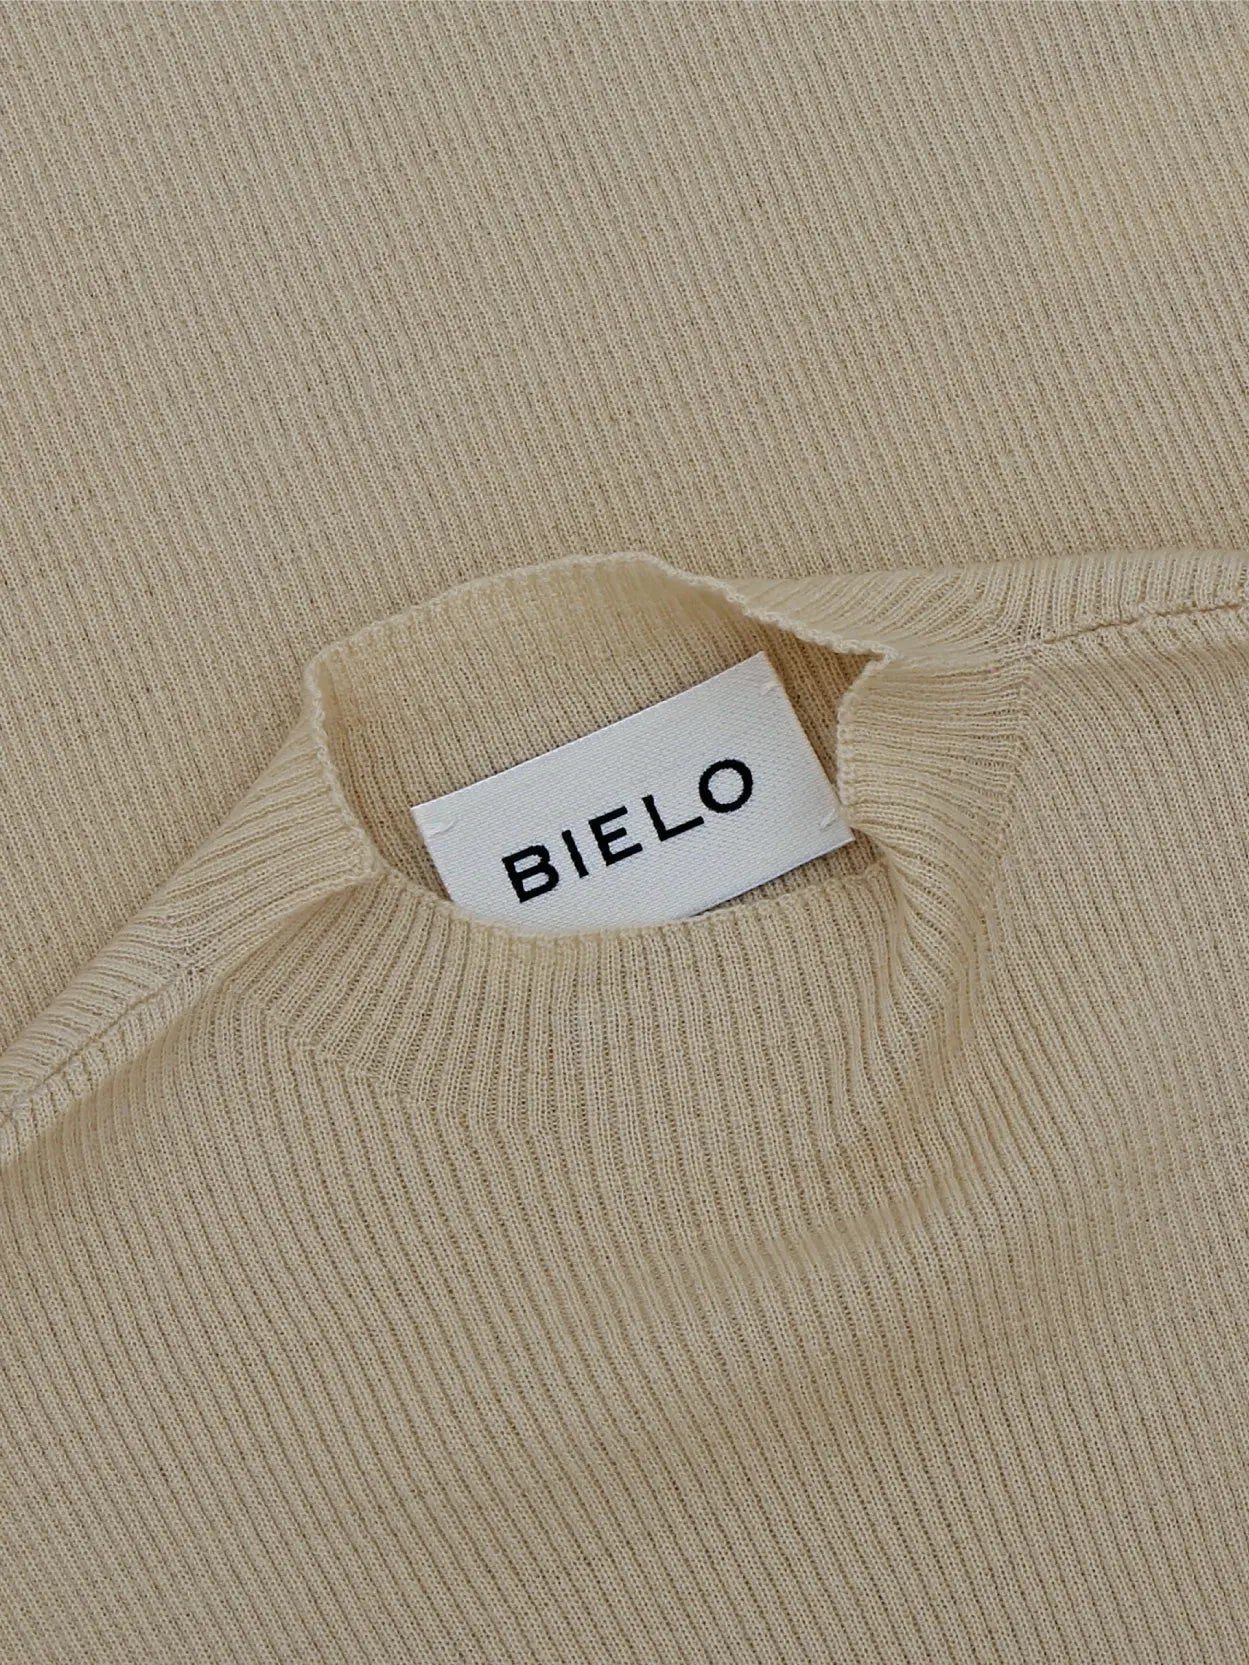 A sleeveless, ribbed-knit beige top with a high, rounded neckline. The Matte Top Cream from Bielo extends to a mid-length and has a simplistic, minimalistic design. The background is plain white.